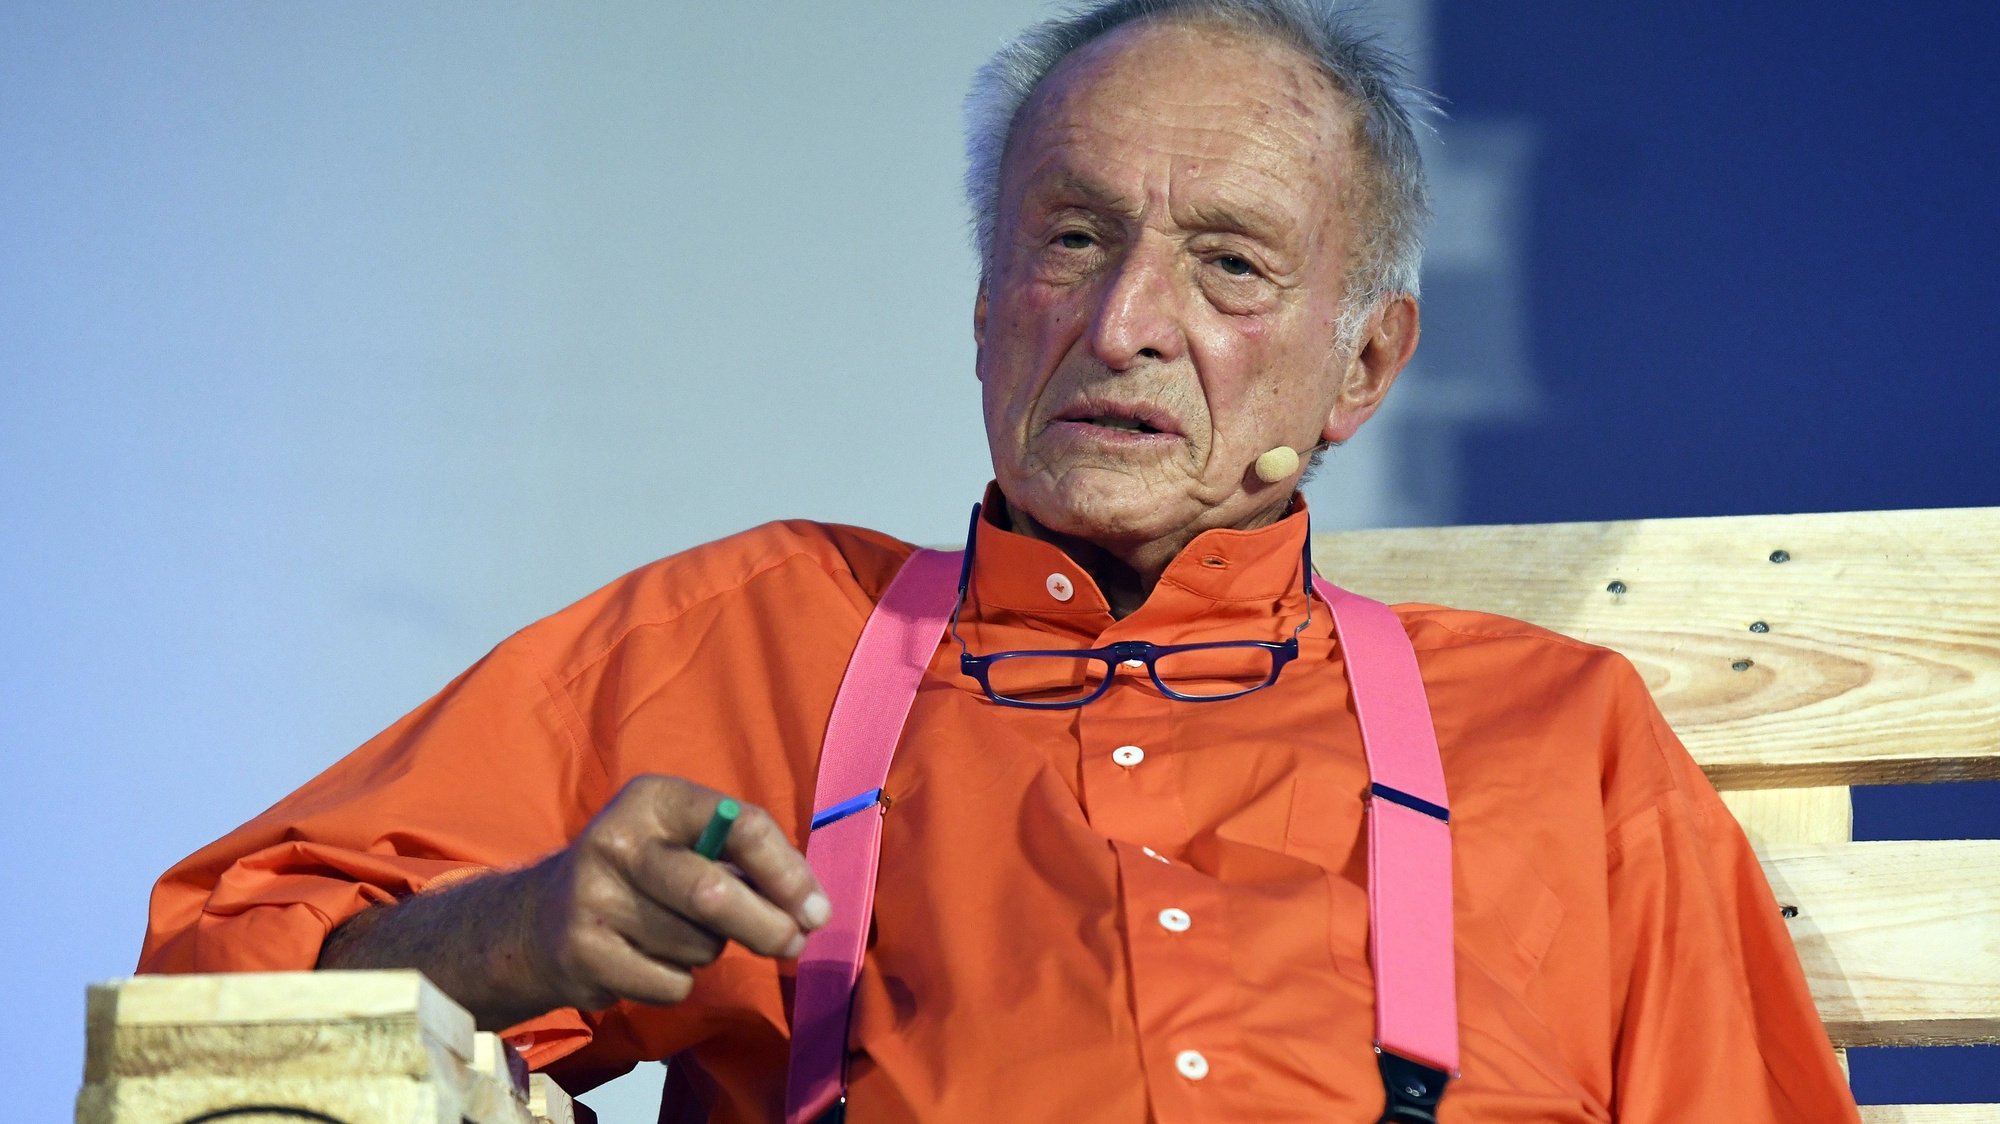 epa06220522 British architect Richard Rogers takes part in the 12th Segovia Ideas Hay Festival in Segovia, Spain, on 22 September 2017. The event runs from 16 to 24 September.  EPA/PABLO MARTIN